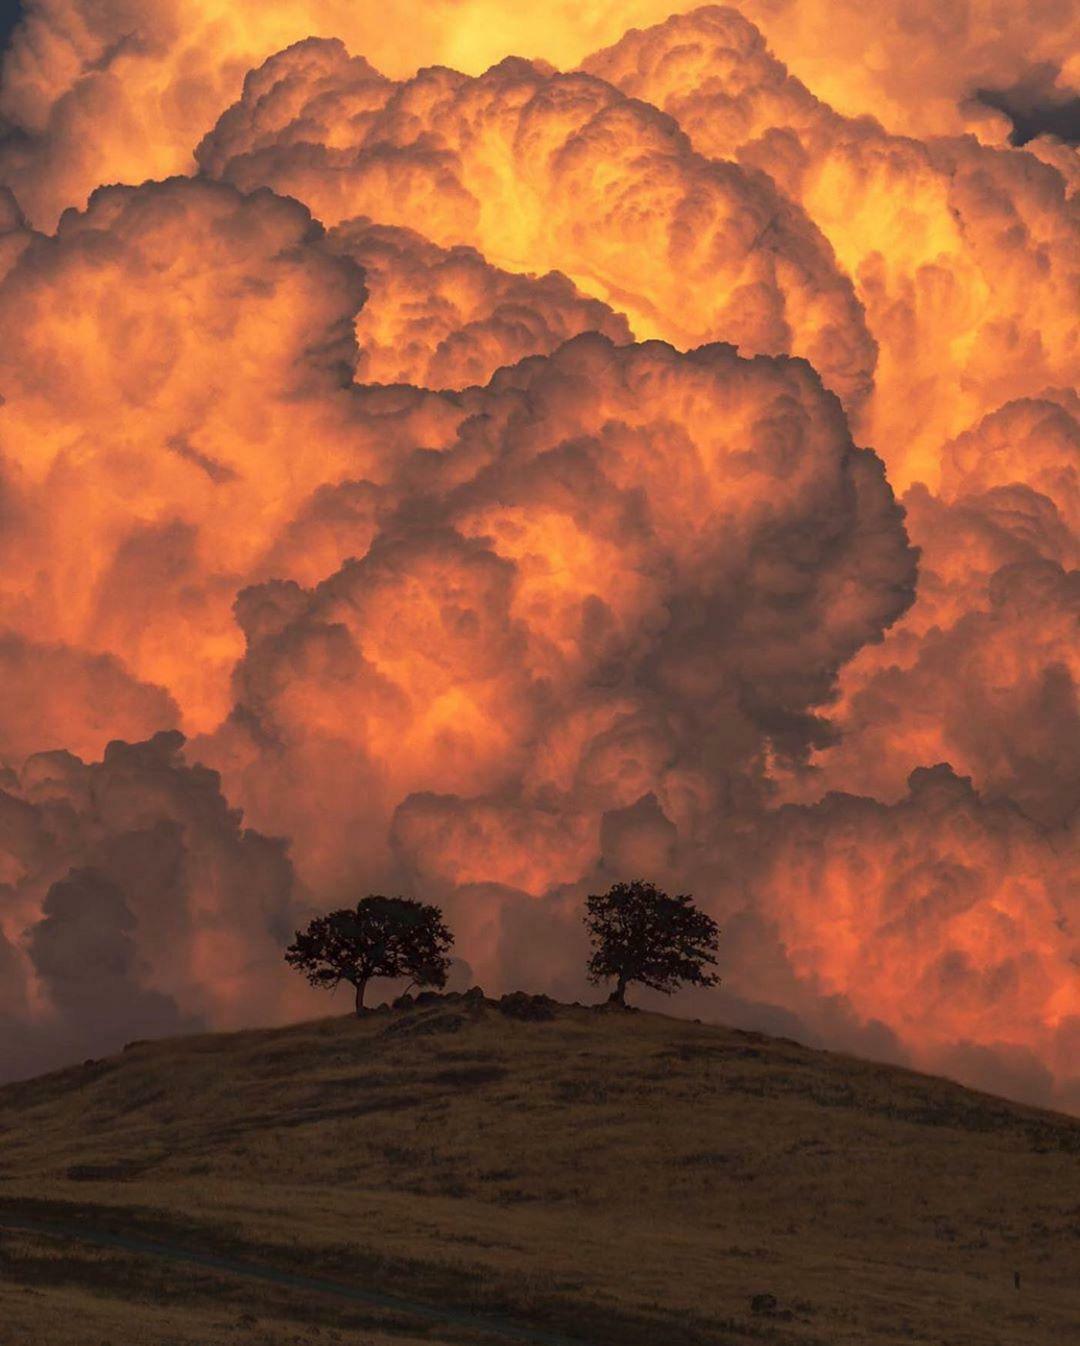 The Most Spectacular But Eerie Effect Was Produced By Towering Thunder Clouds That Were Photographed During A Sunset